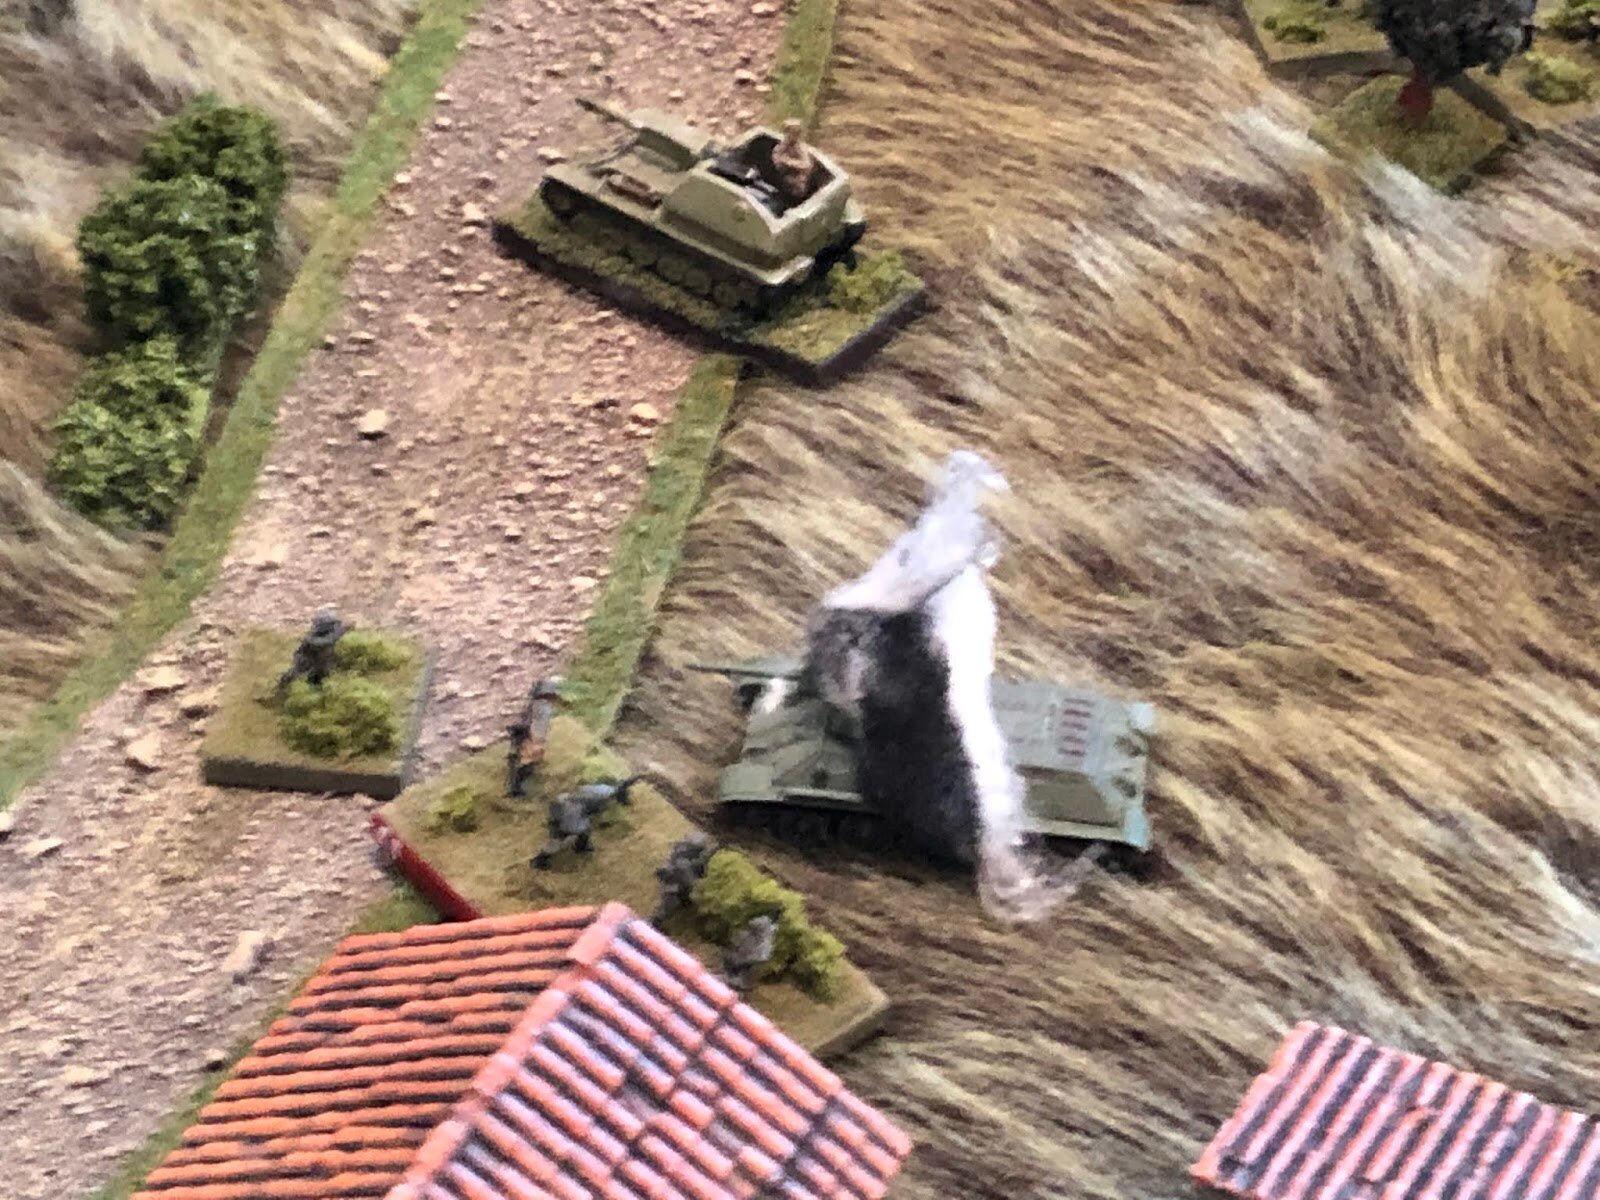  The T-34's back deck catches fire and several internal explosions are heard as the turret slews left and smoke belches forth from its hatches! 